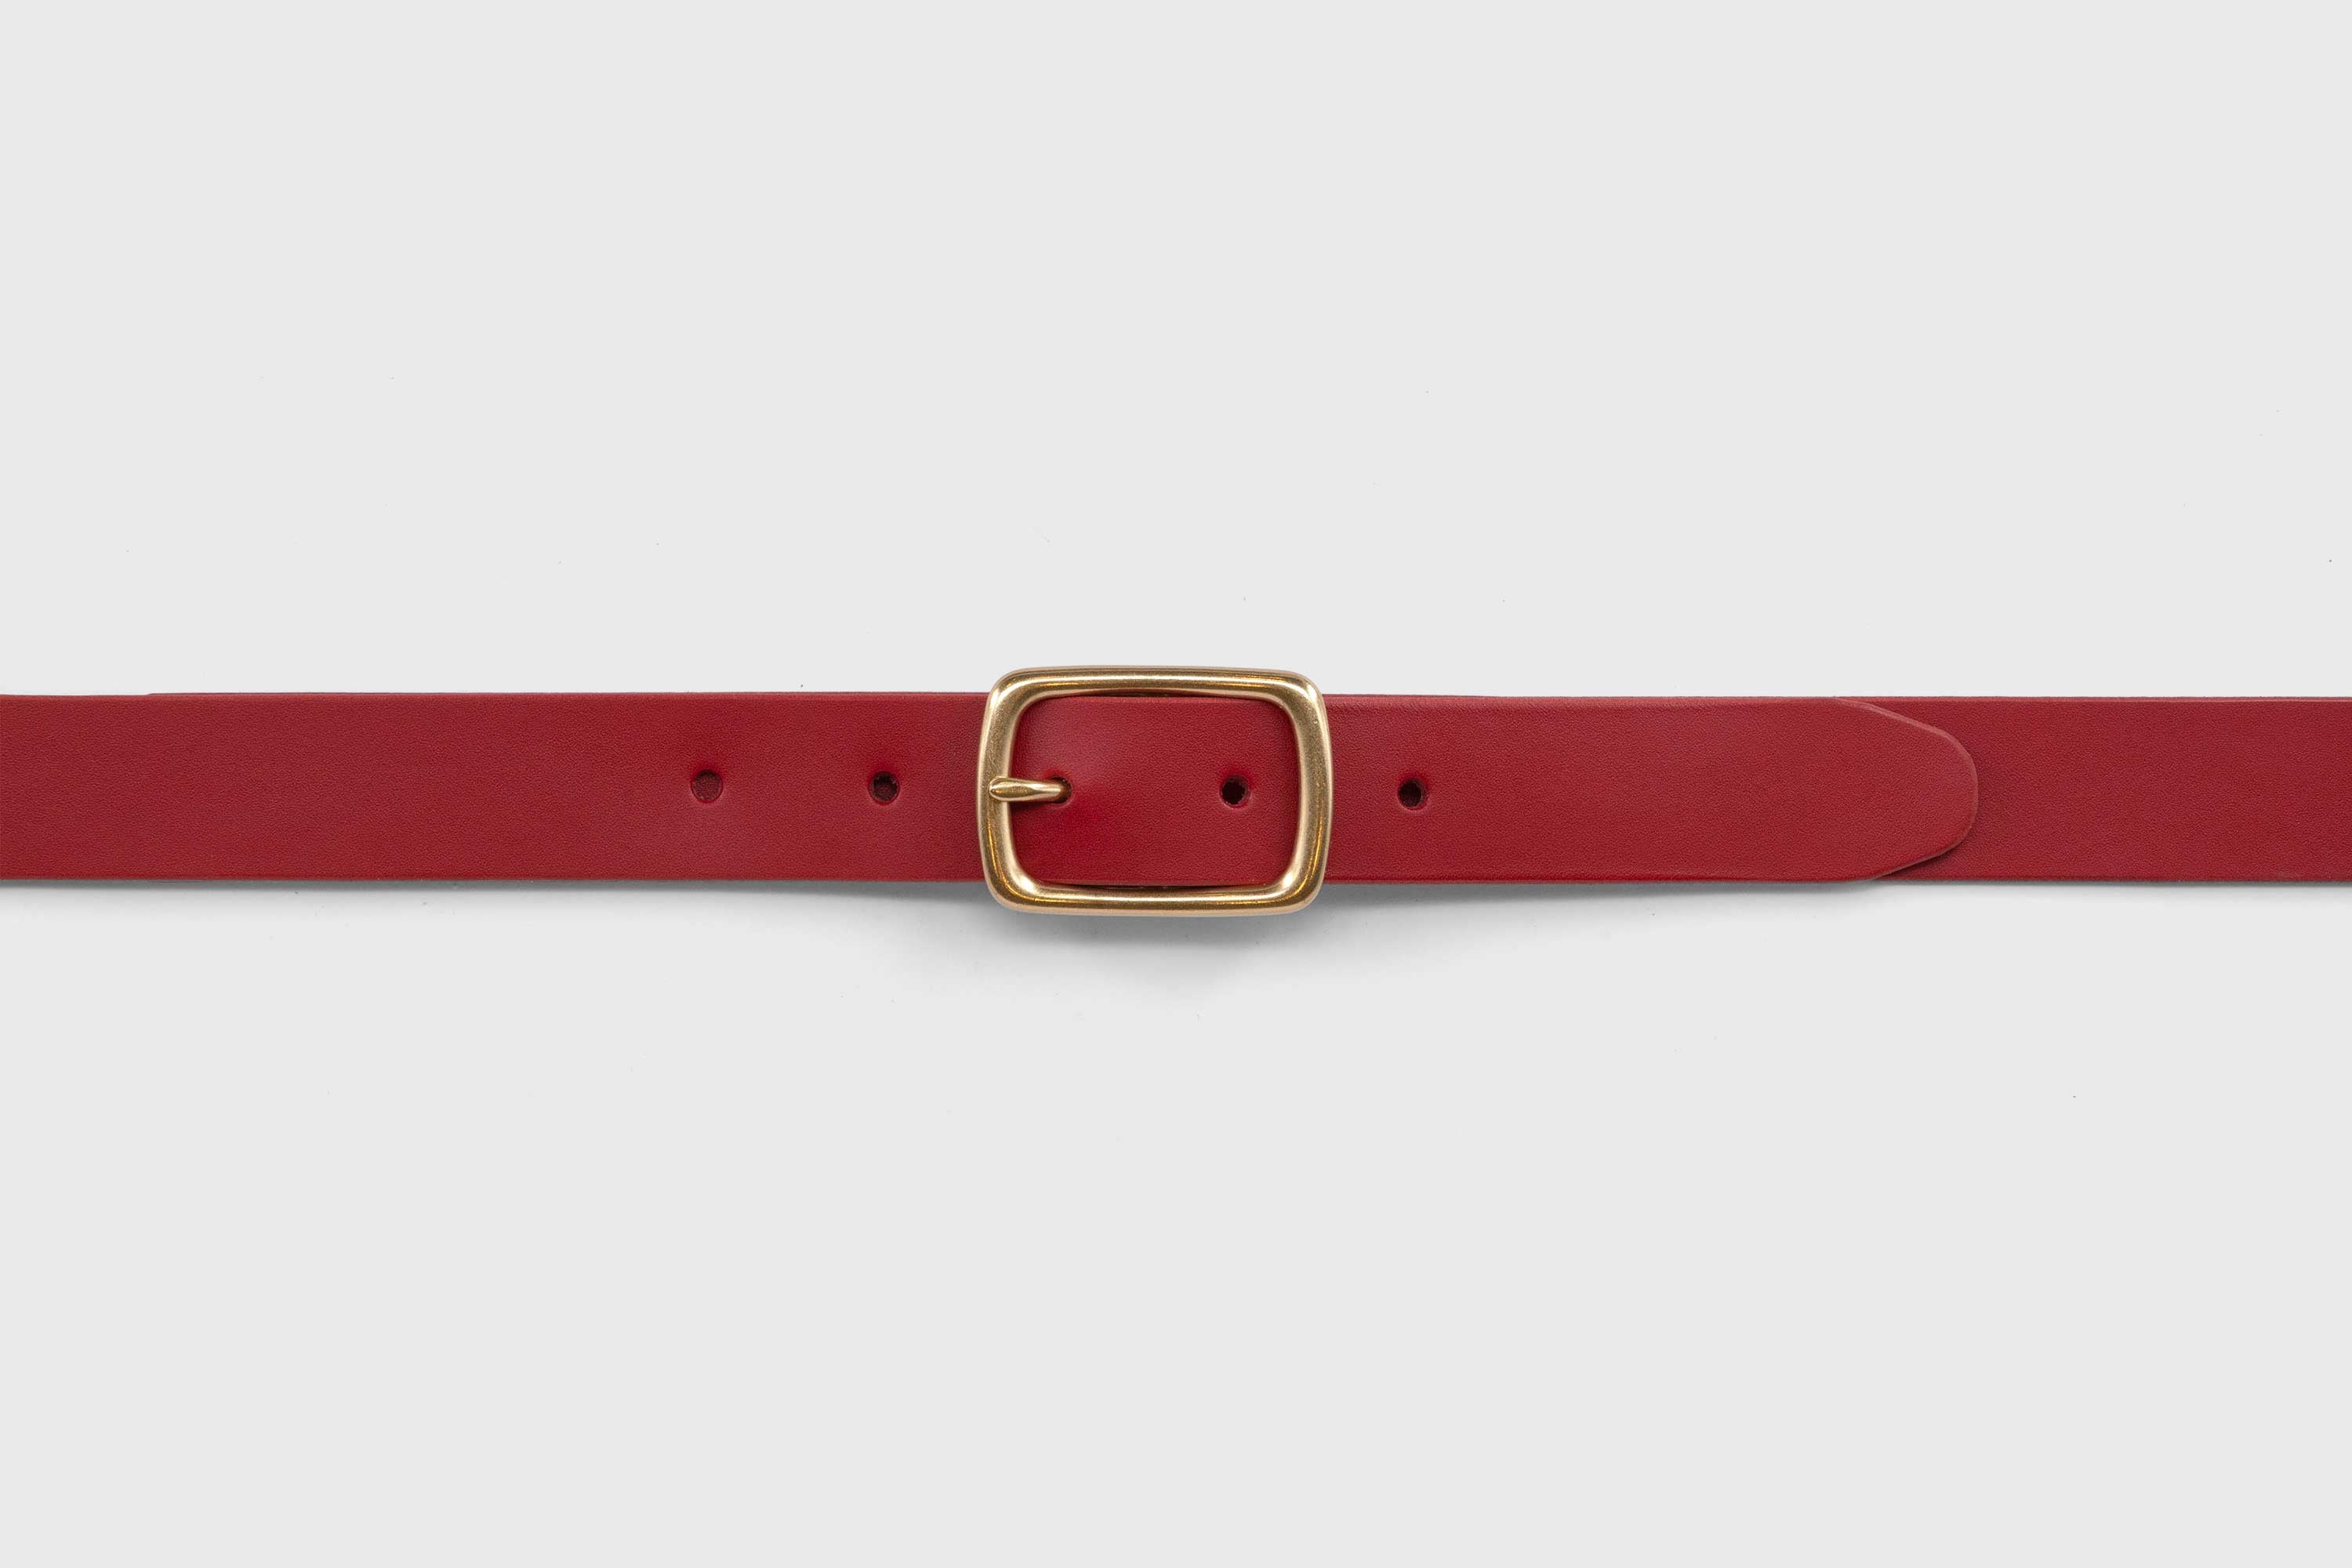 Leather Belt Small Ata Solid Brass Buckle Red vegetable tanned full grain leather Minimalist Design Atelier Madre Manuel Dreesmann Barcelona